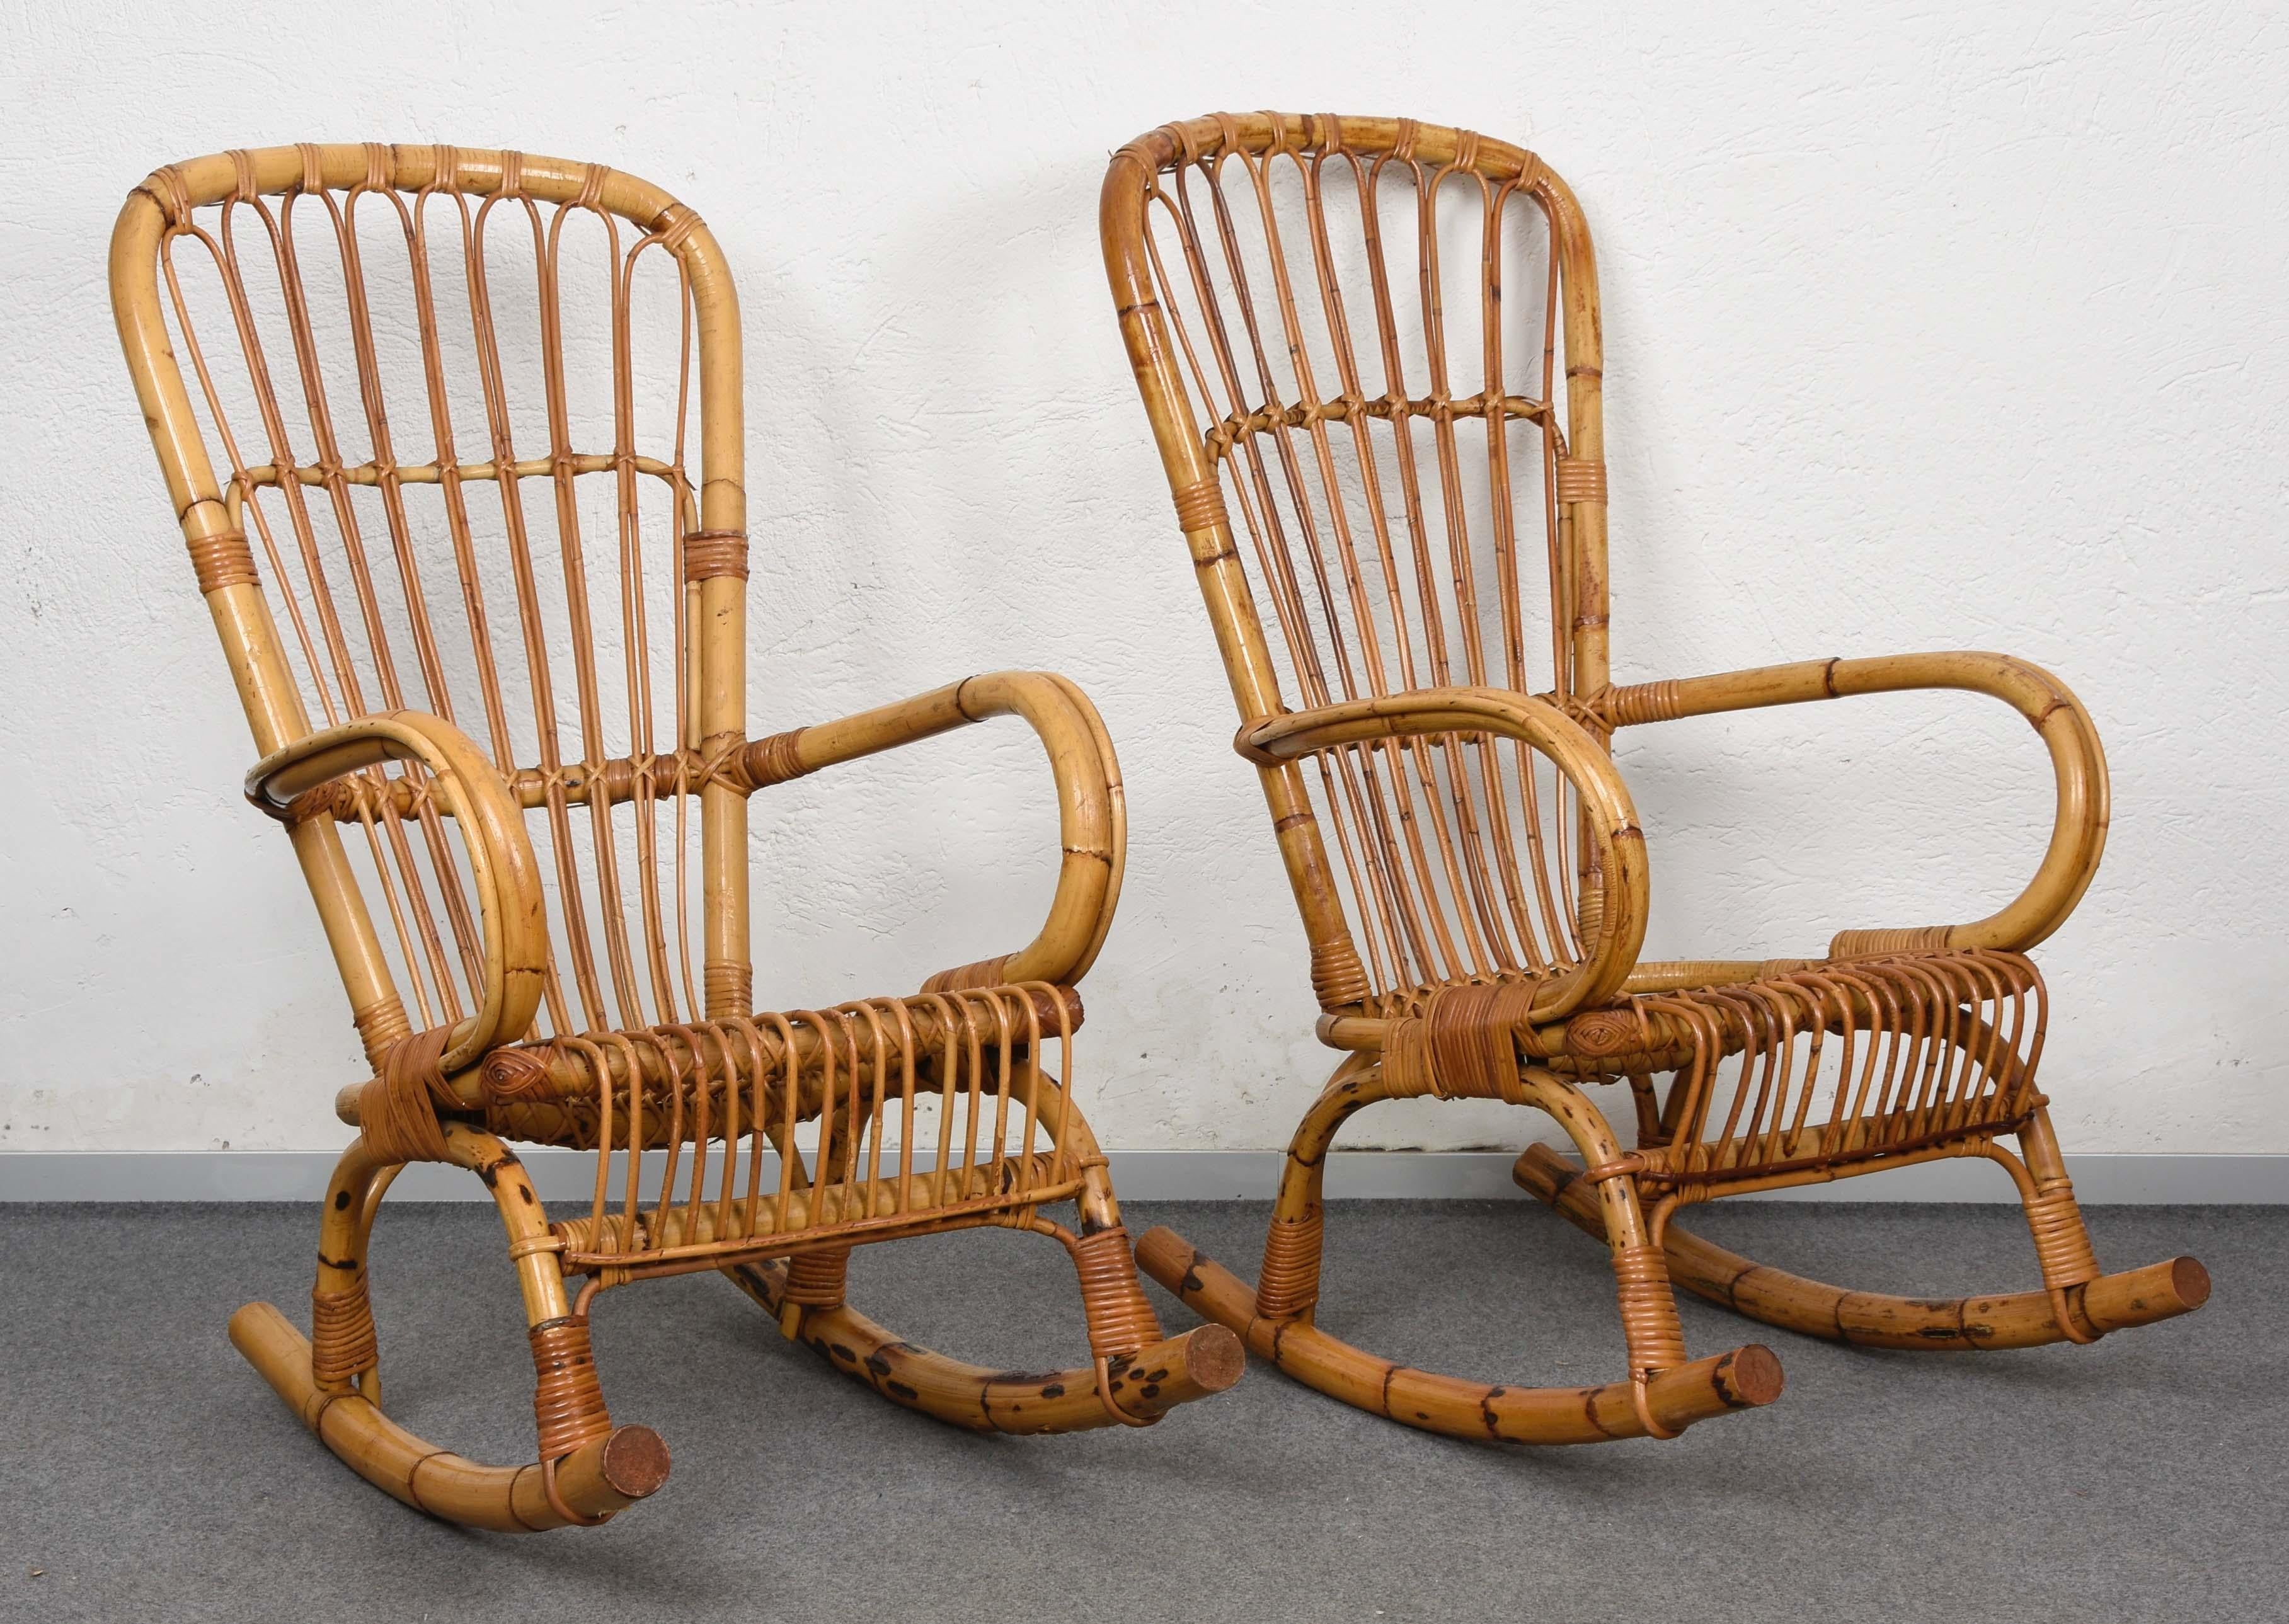 Pair of Midcentury Cote d'Azur Rattan and Bamboo Italian Rocking Chairs, 1960s For Sale 5